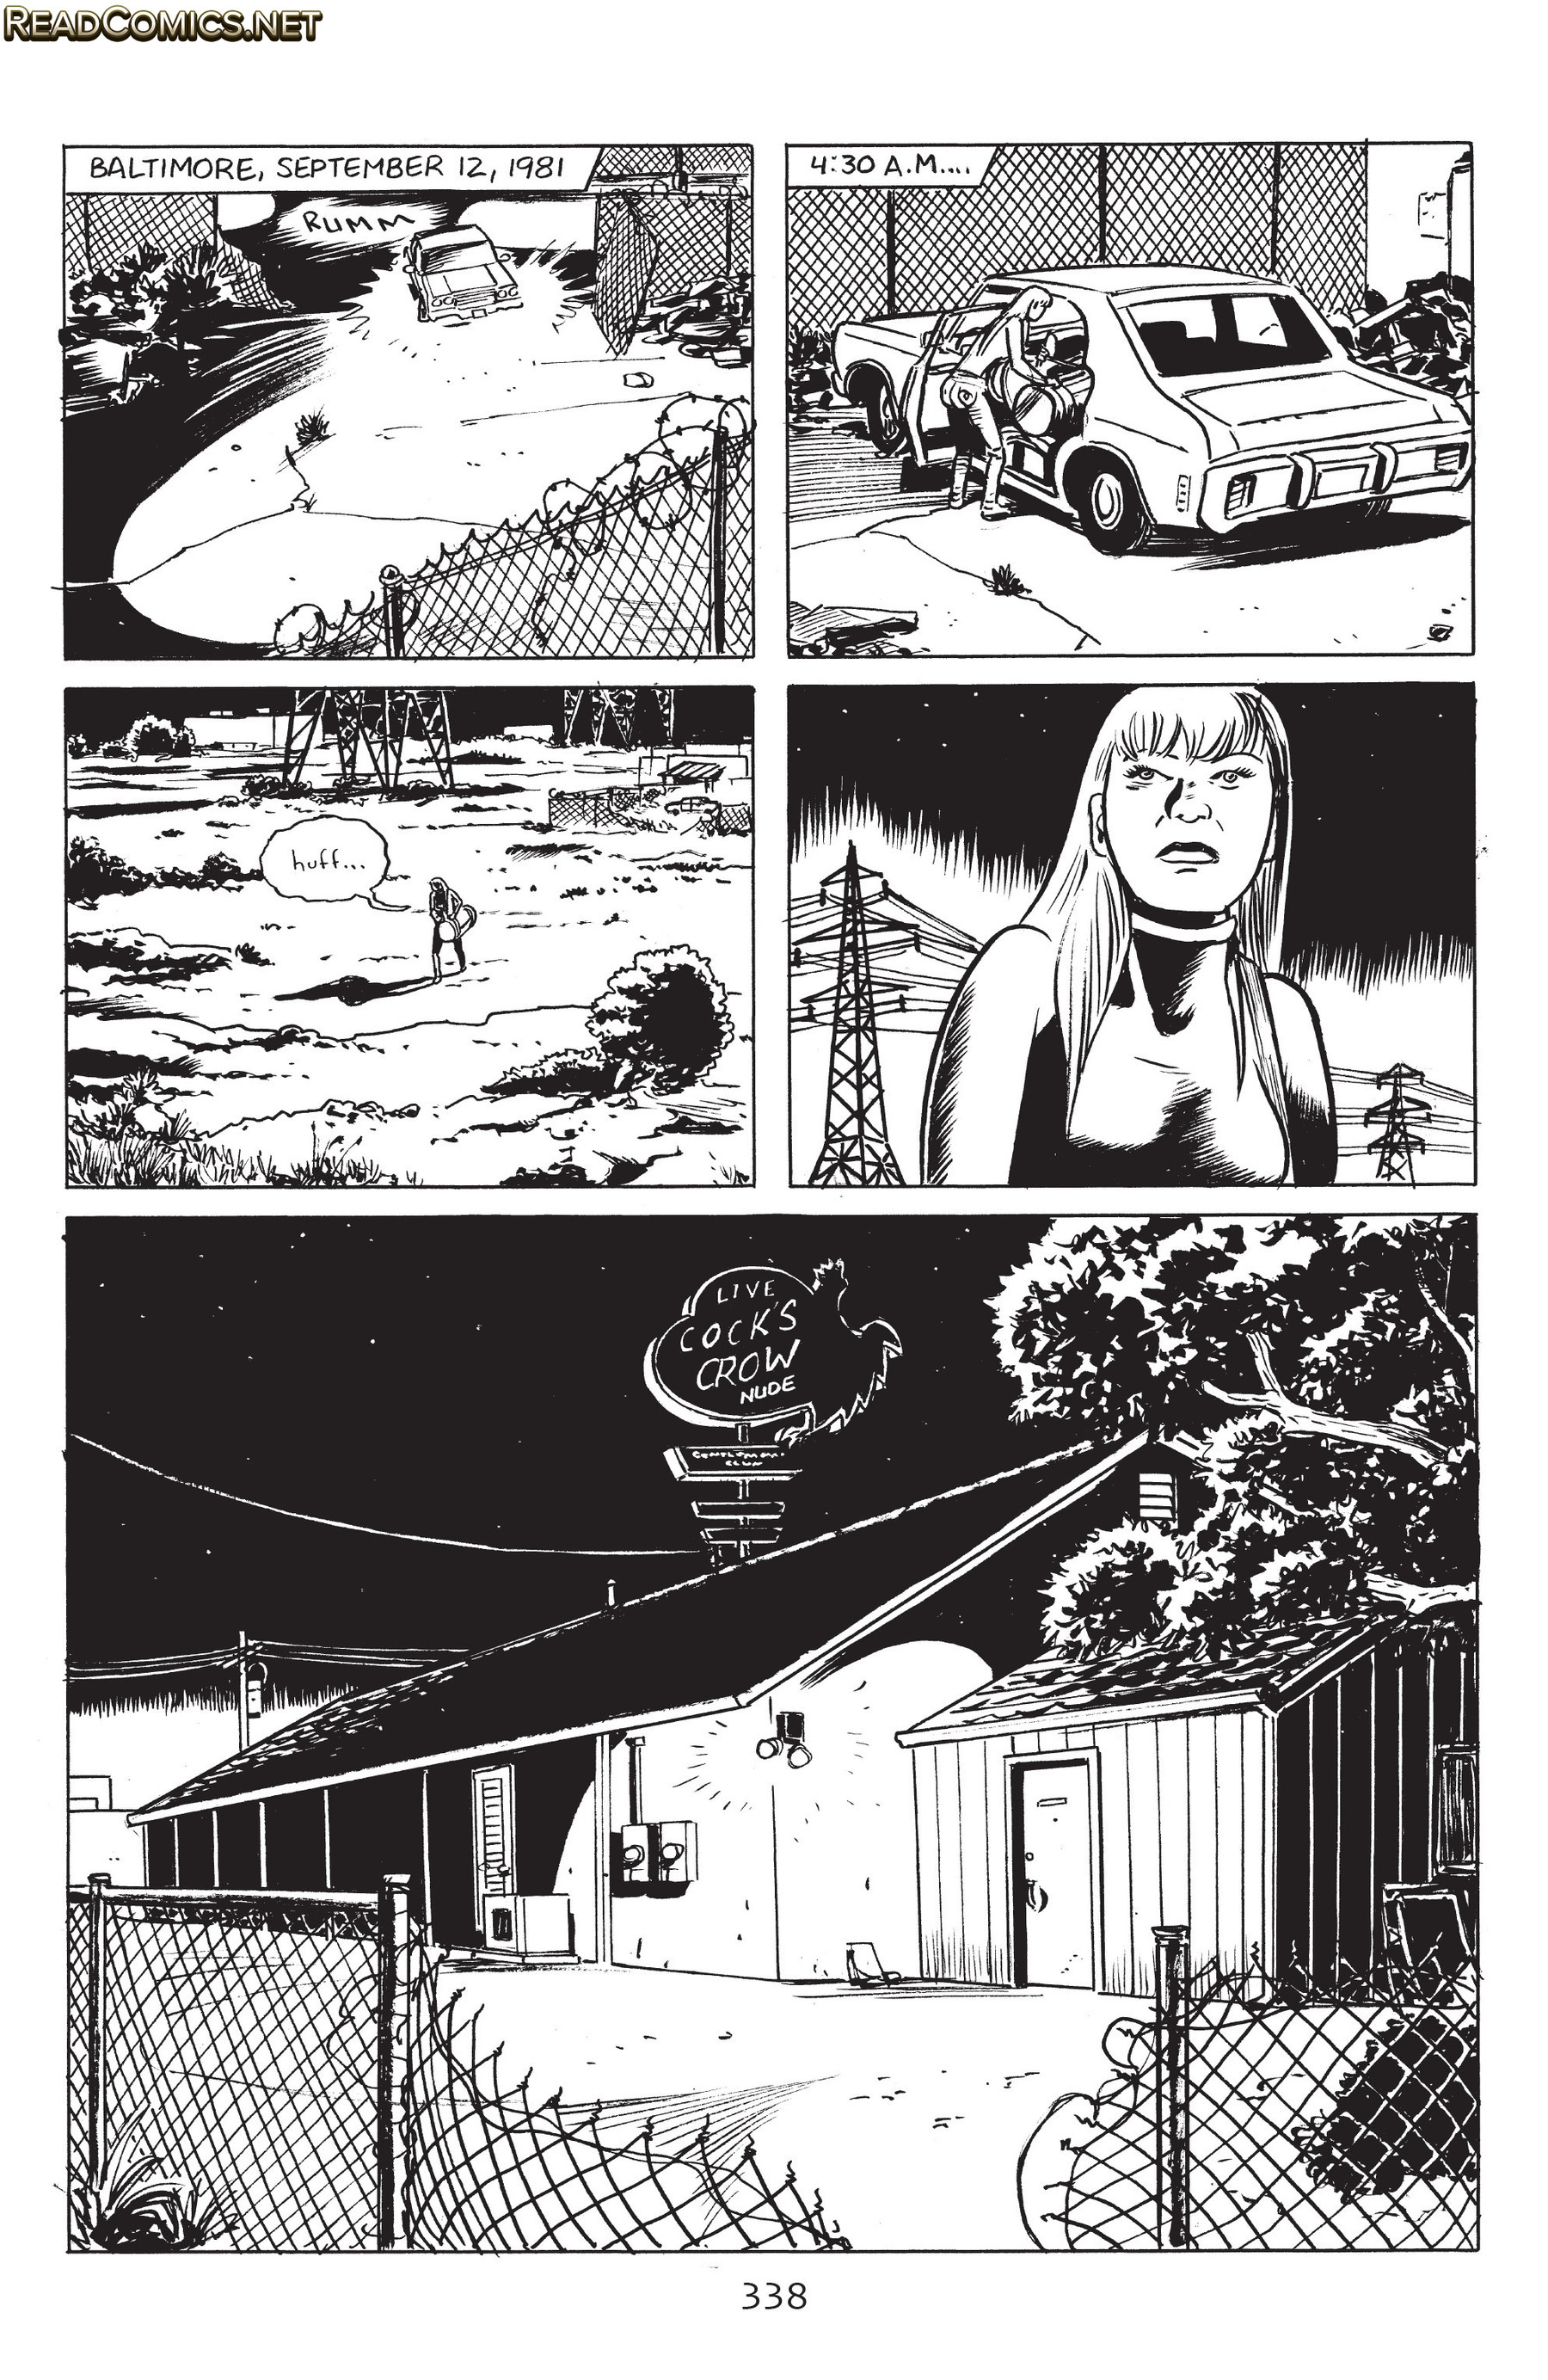 Stray Bullets: Sunshine & Roses (2015-): Chapter 13 - Page 3